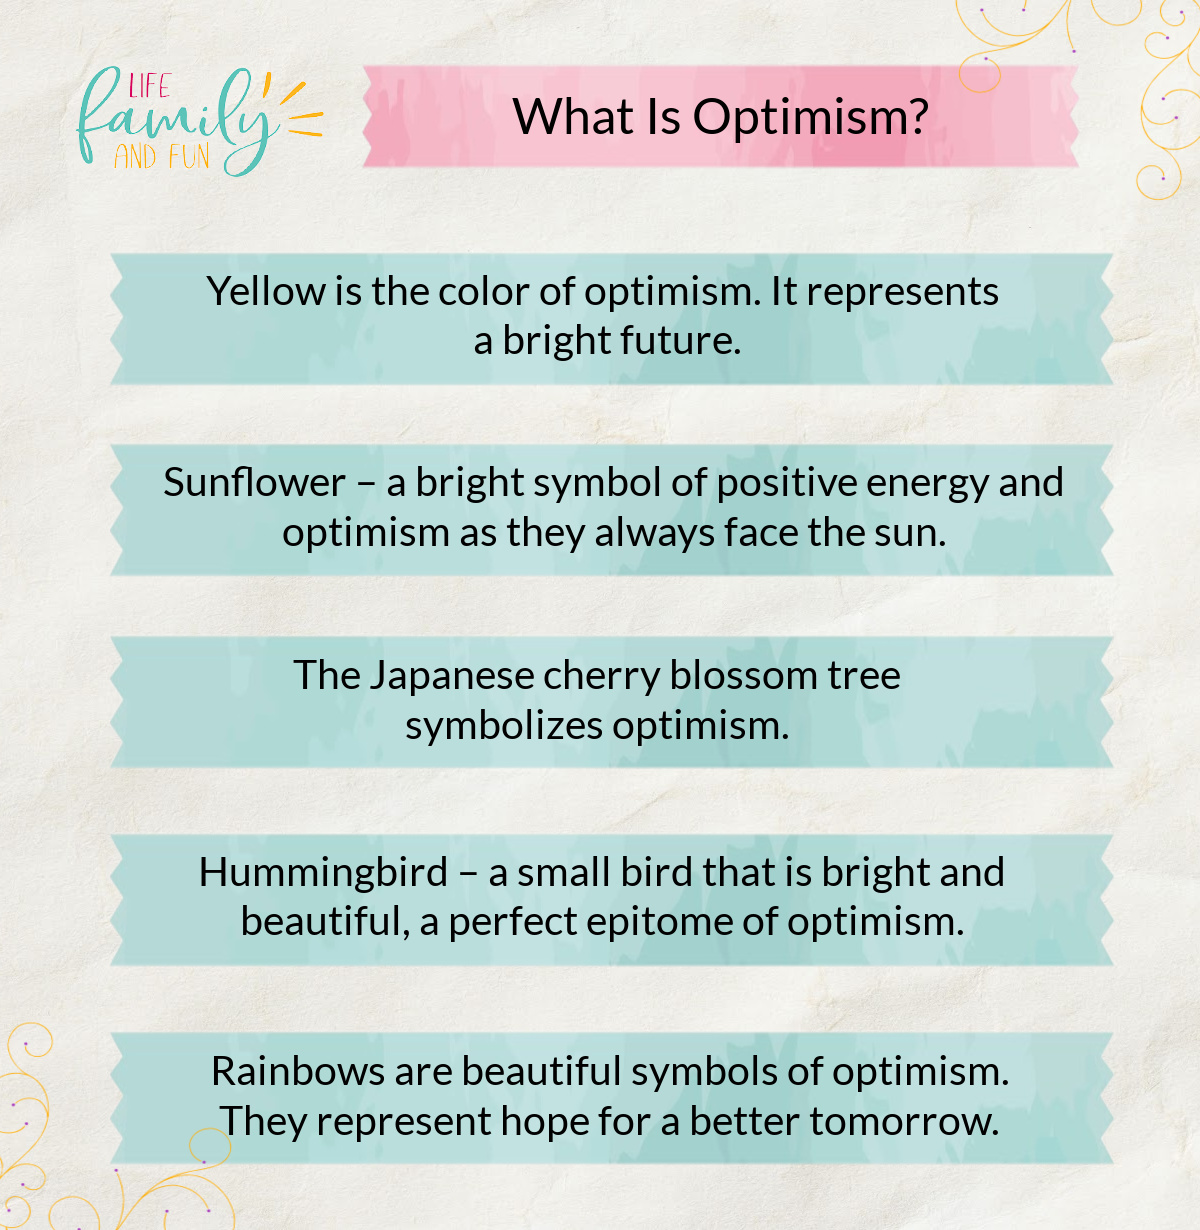 What Is Optimism?